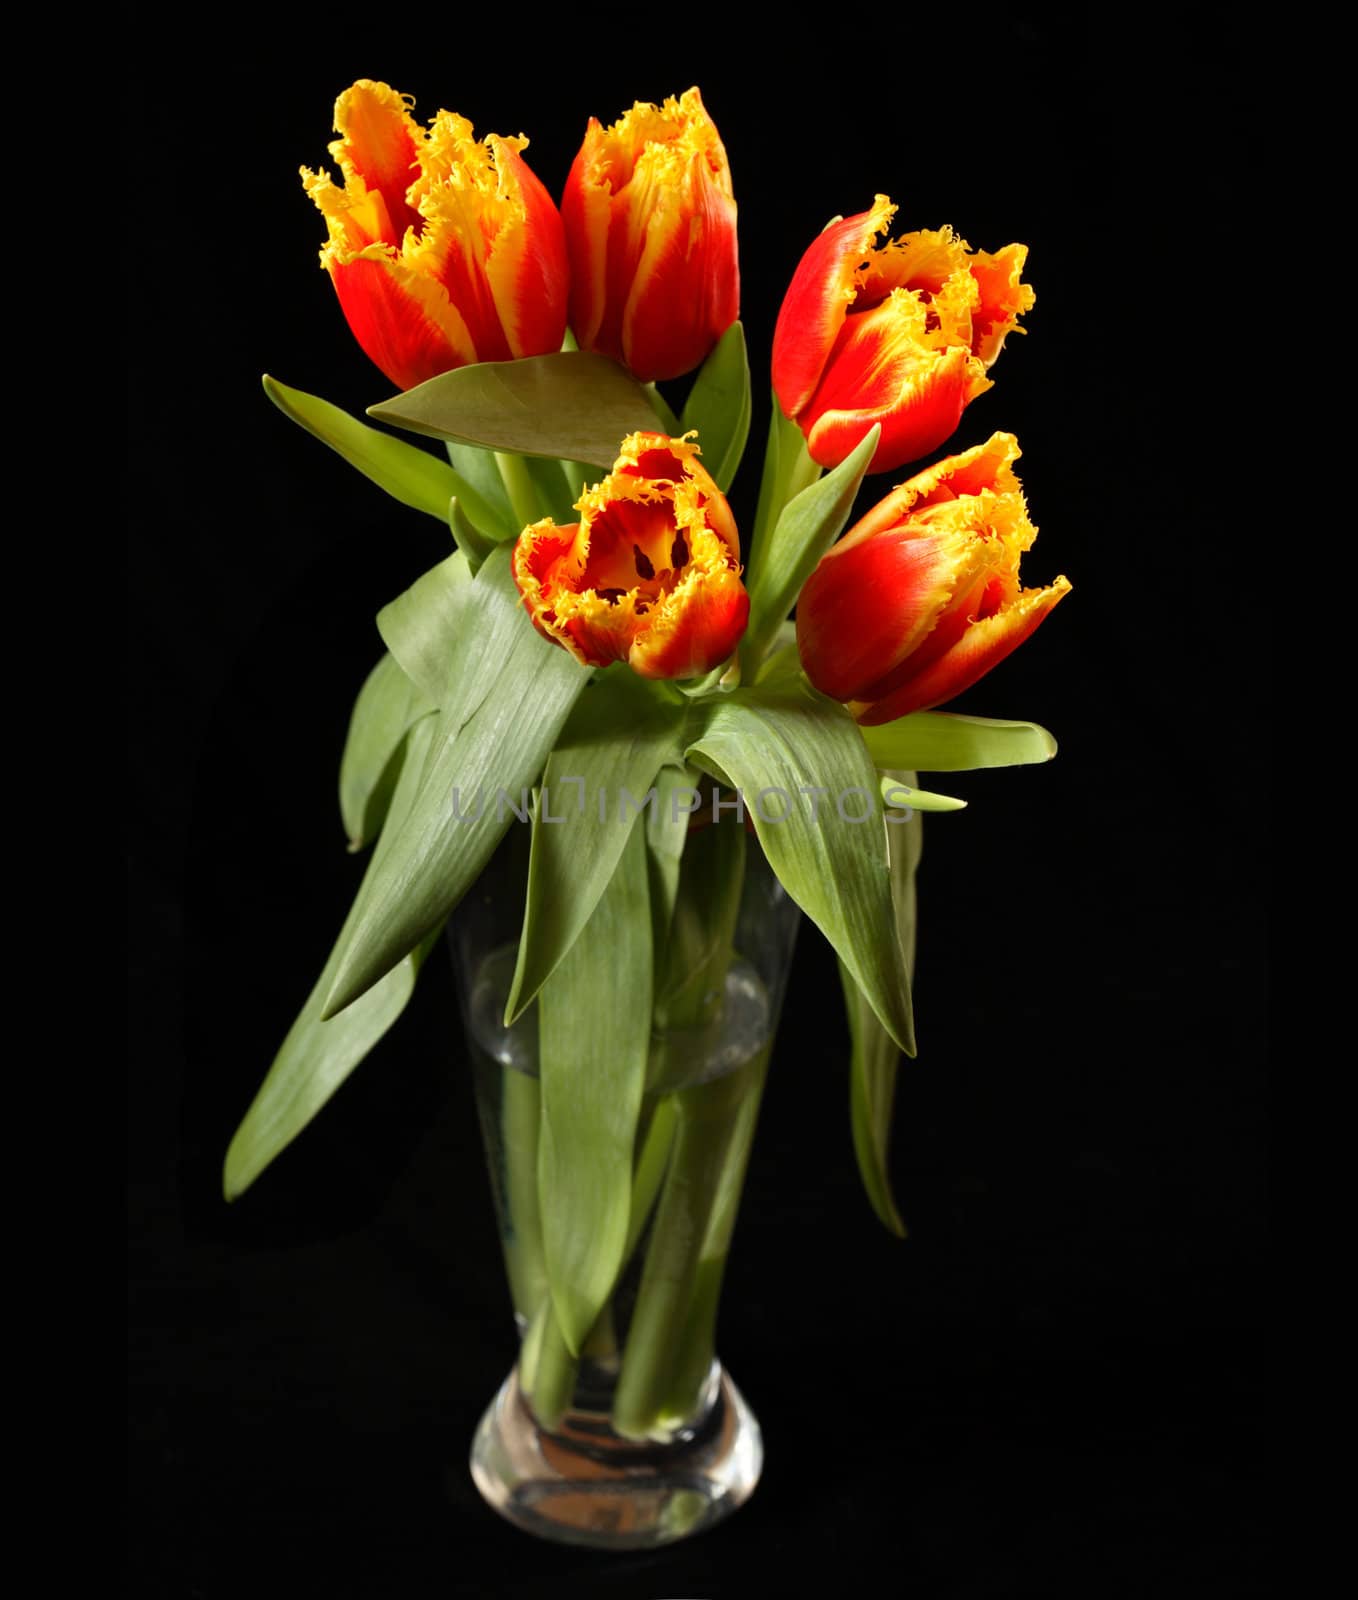 Red tulips on a black background